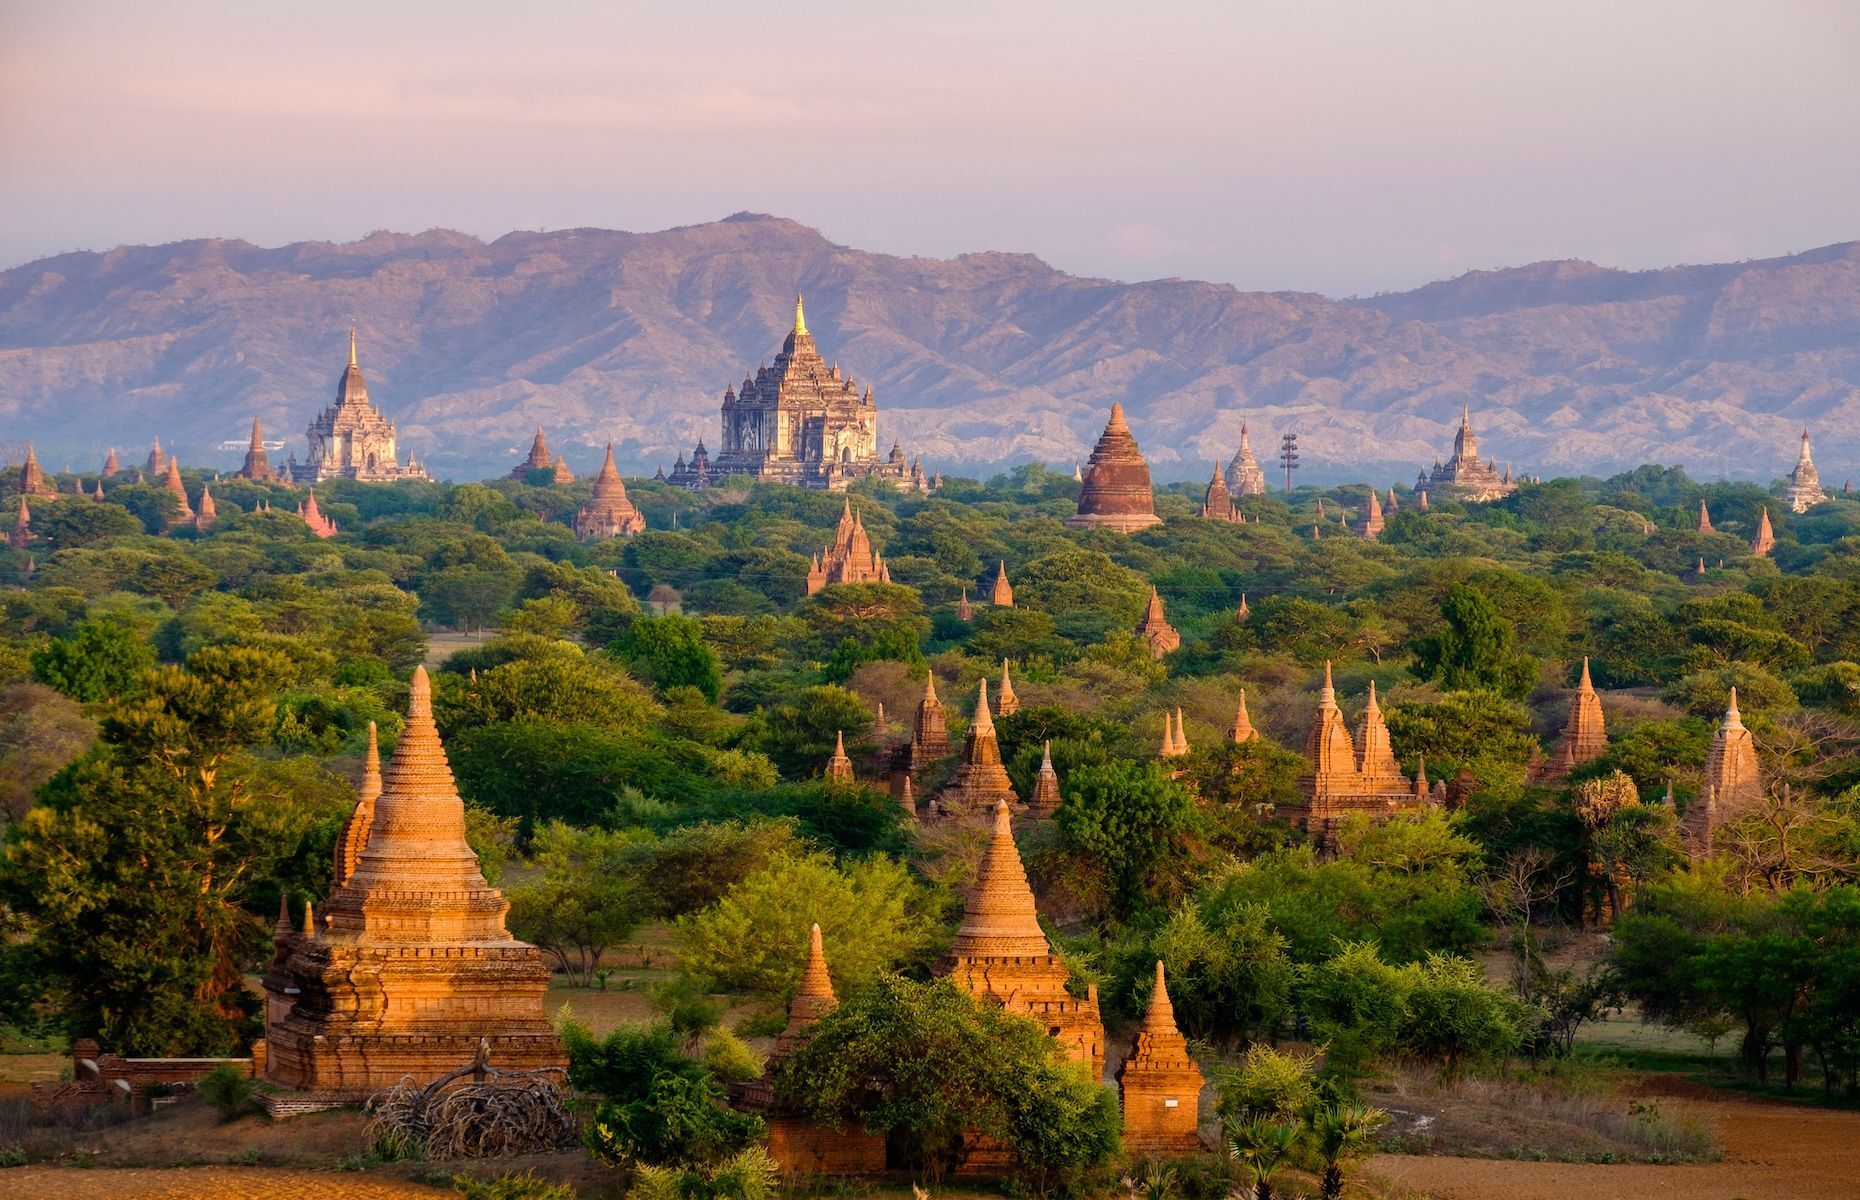 The enigmatic city of <a href="https://www.theatlantic.com/photo/2019/07/bagan-myanmar-photos/594985/" rel="noreferrer noopener">Bagan</a> is an extraordinary archaeological site featuring thousands of temples scattered over a vast territory in the heart of Myanmar. Visit historical monuments like the Ananda and Dhammayangyi Temples and don’t forget to book a cruise on the Ayeyarwady River to admire the landscape from a different perspective. For a truly magical experience, climb aboard a hot-air balloon at sunrise or sunset for an incredible view of Bagan—you won’t regret it!